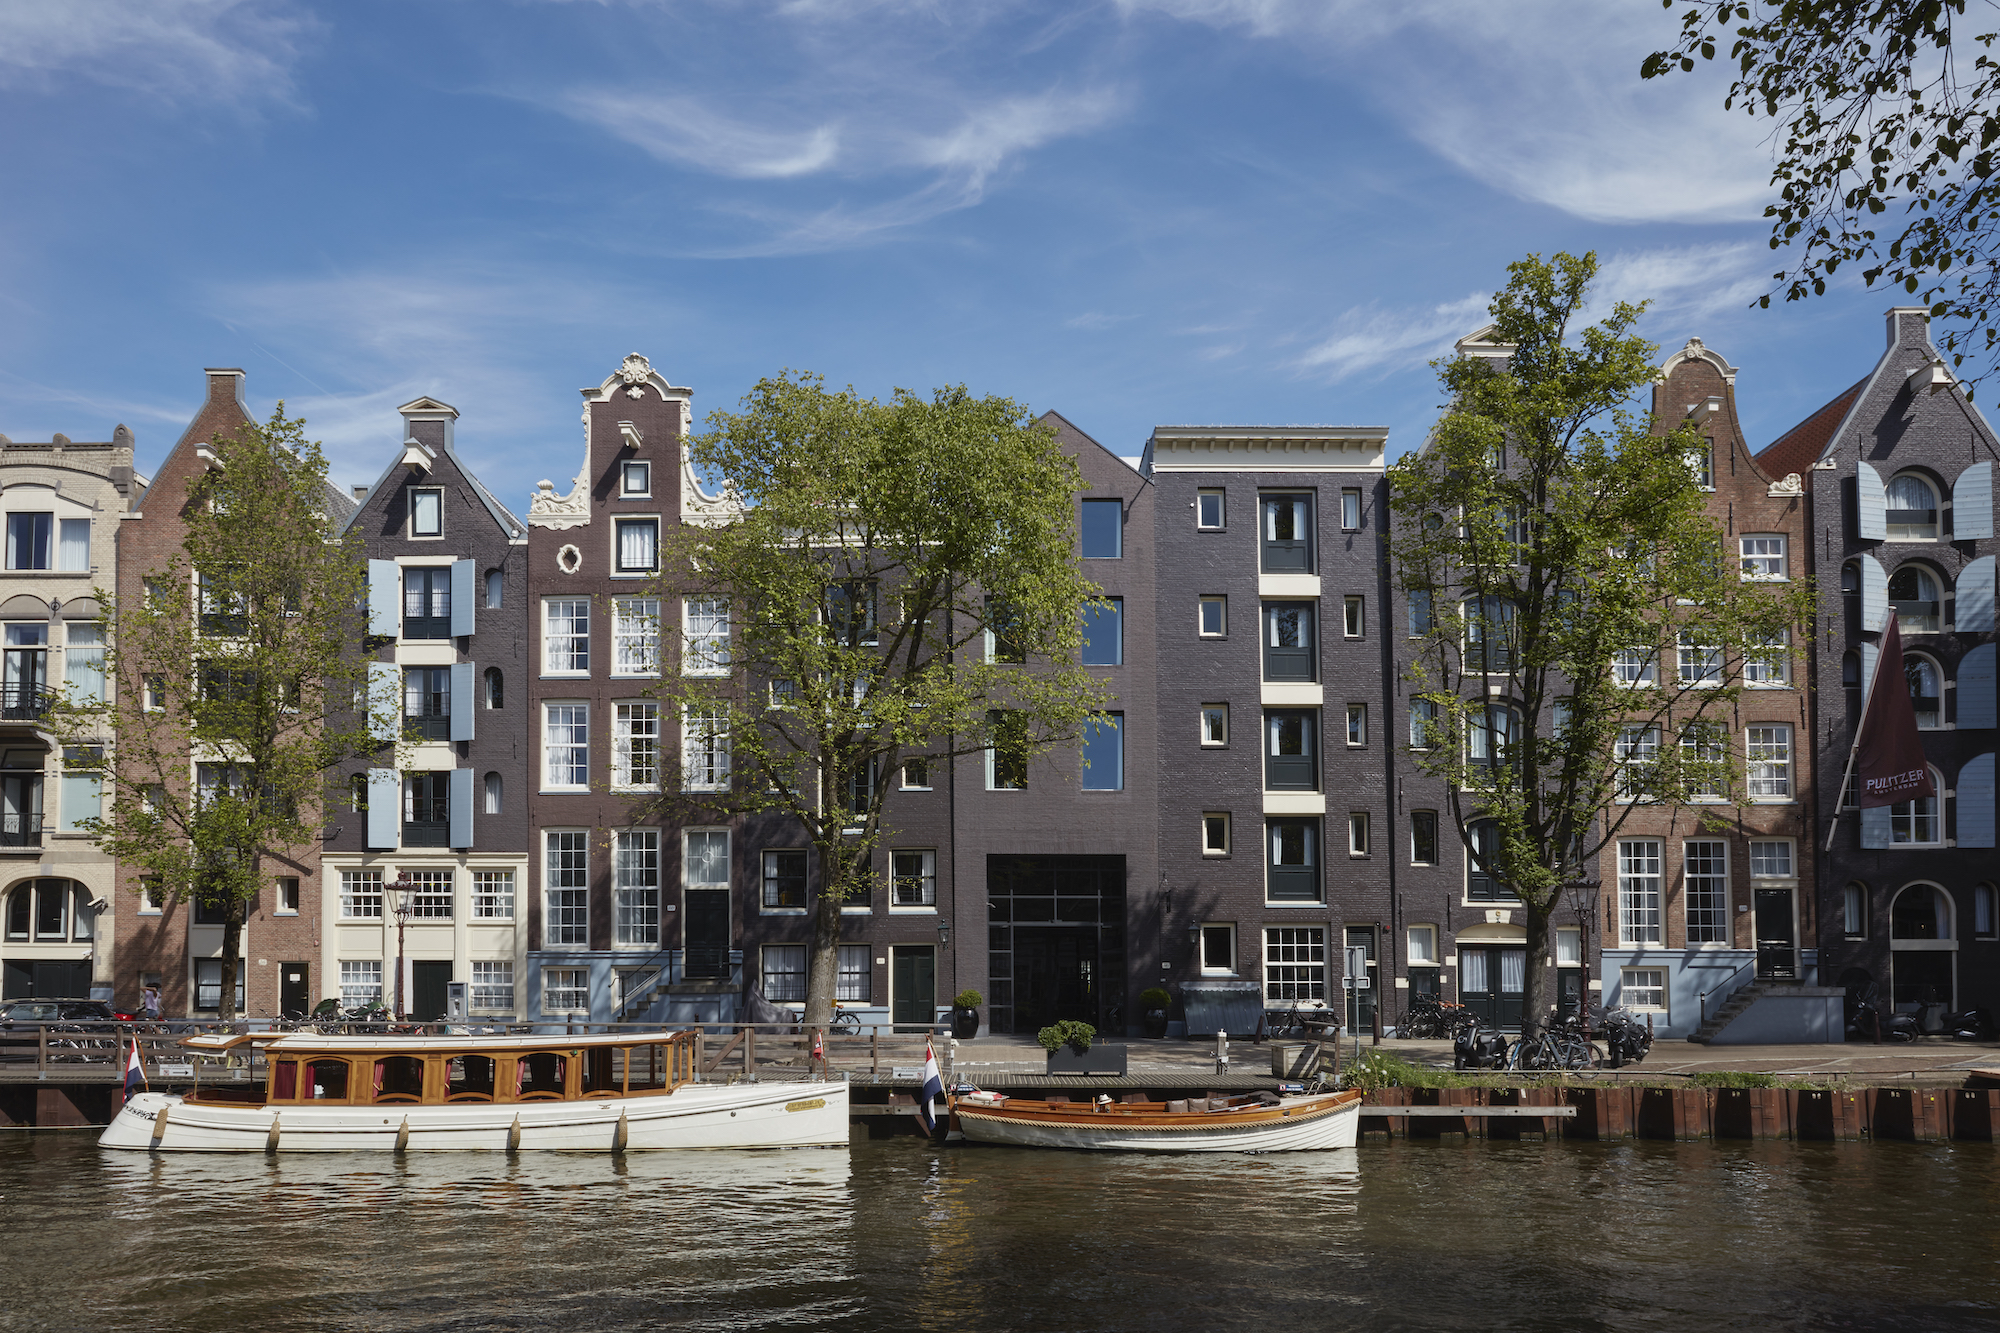 External view of the one-of-a-kind Pulitzer Hotel in Amsterdam, which was created out of 25 interconnected Golden Age canal houses. Designed by Jacu Strauss of the Lore Group - Effect Magazine